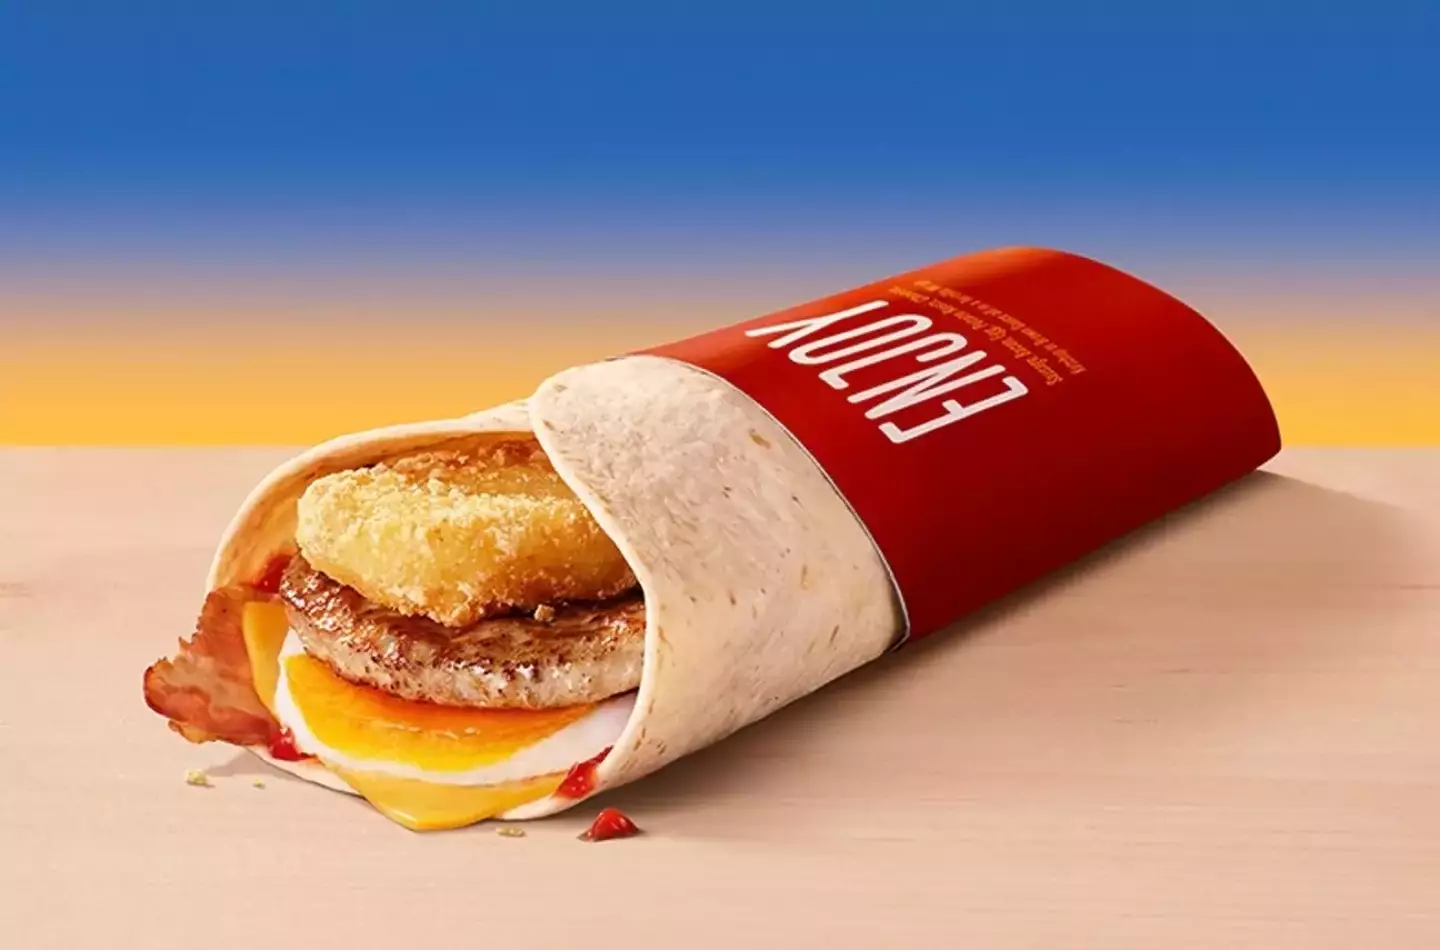 The new and improved Breakfast Wrap.